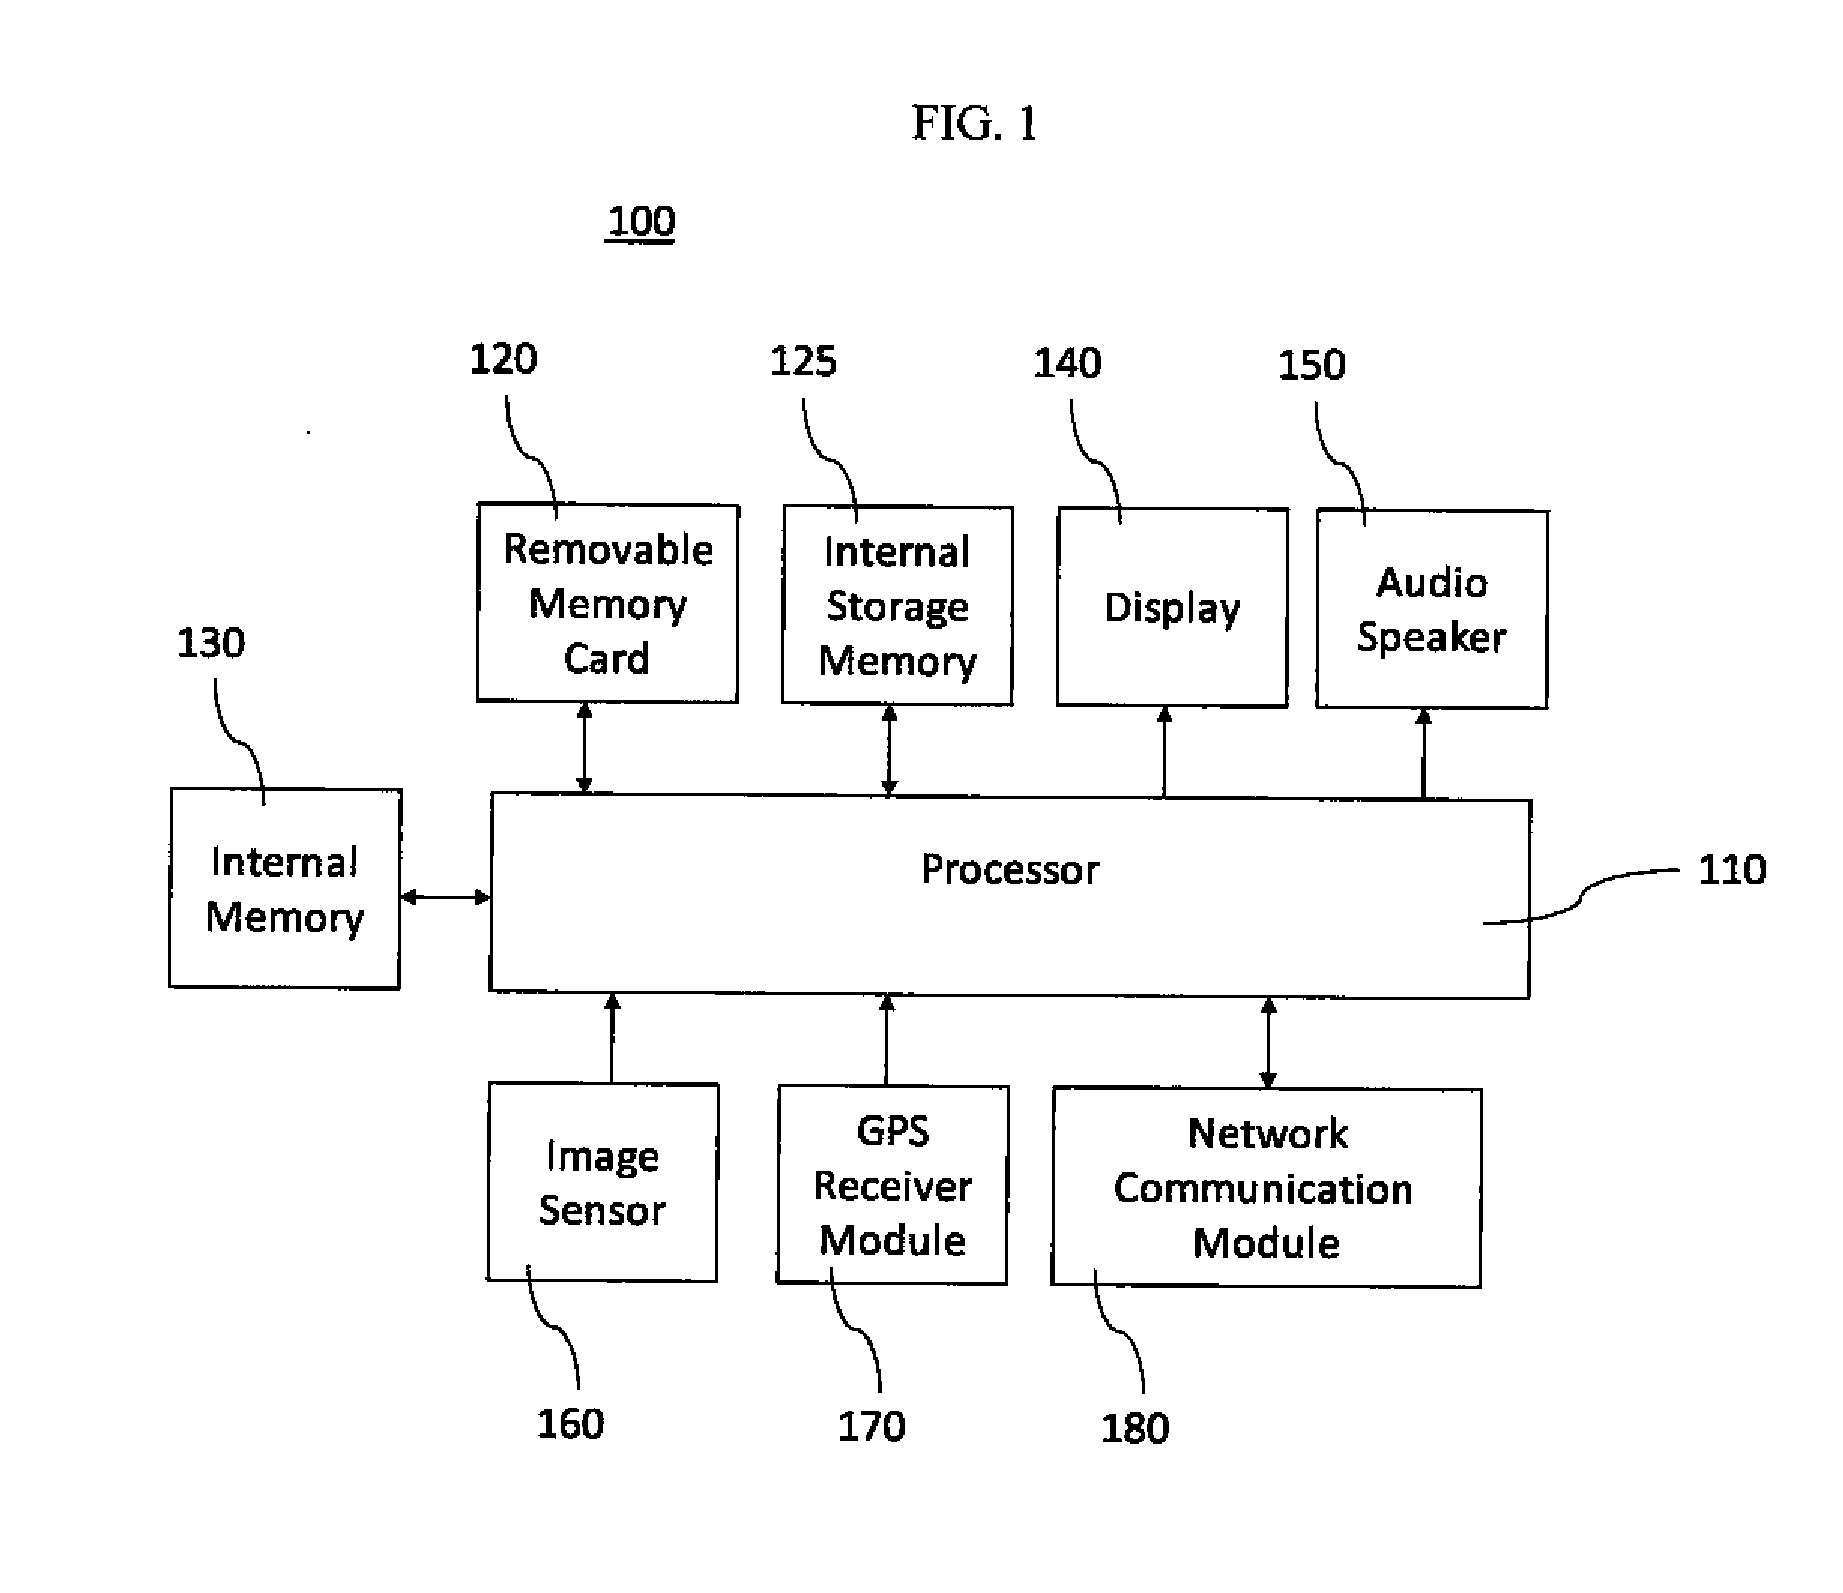 System for managing privacy of digital images